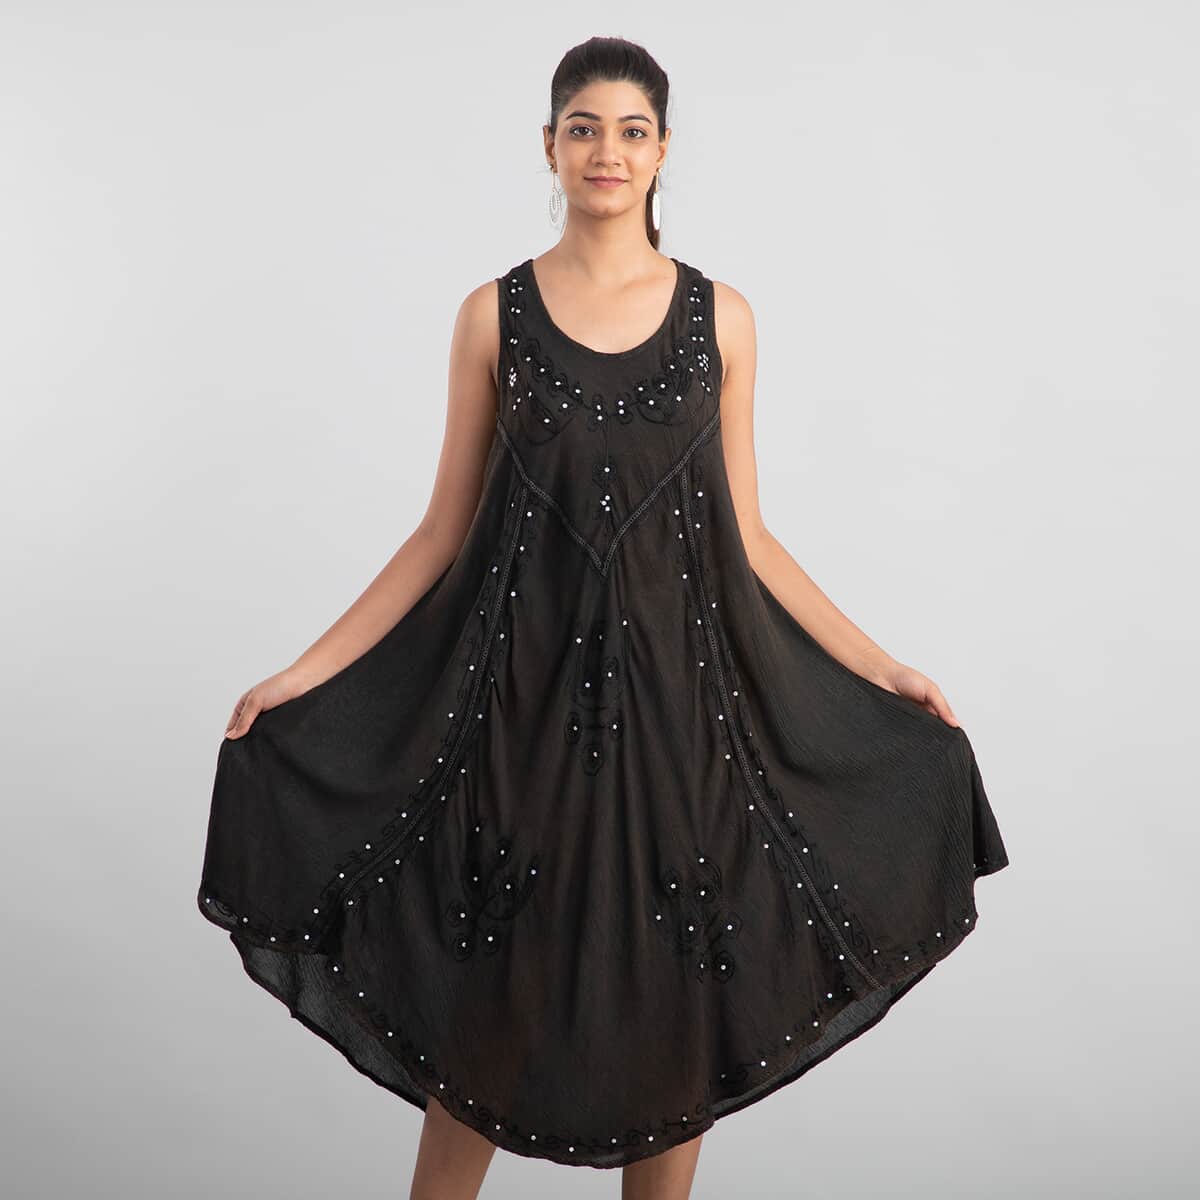 JOVIE Black Womenâ€™s Umbrella Dress with Sequin Floral Embroidery - One Size Missy (44"Lx23"W) image number 2